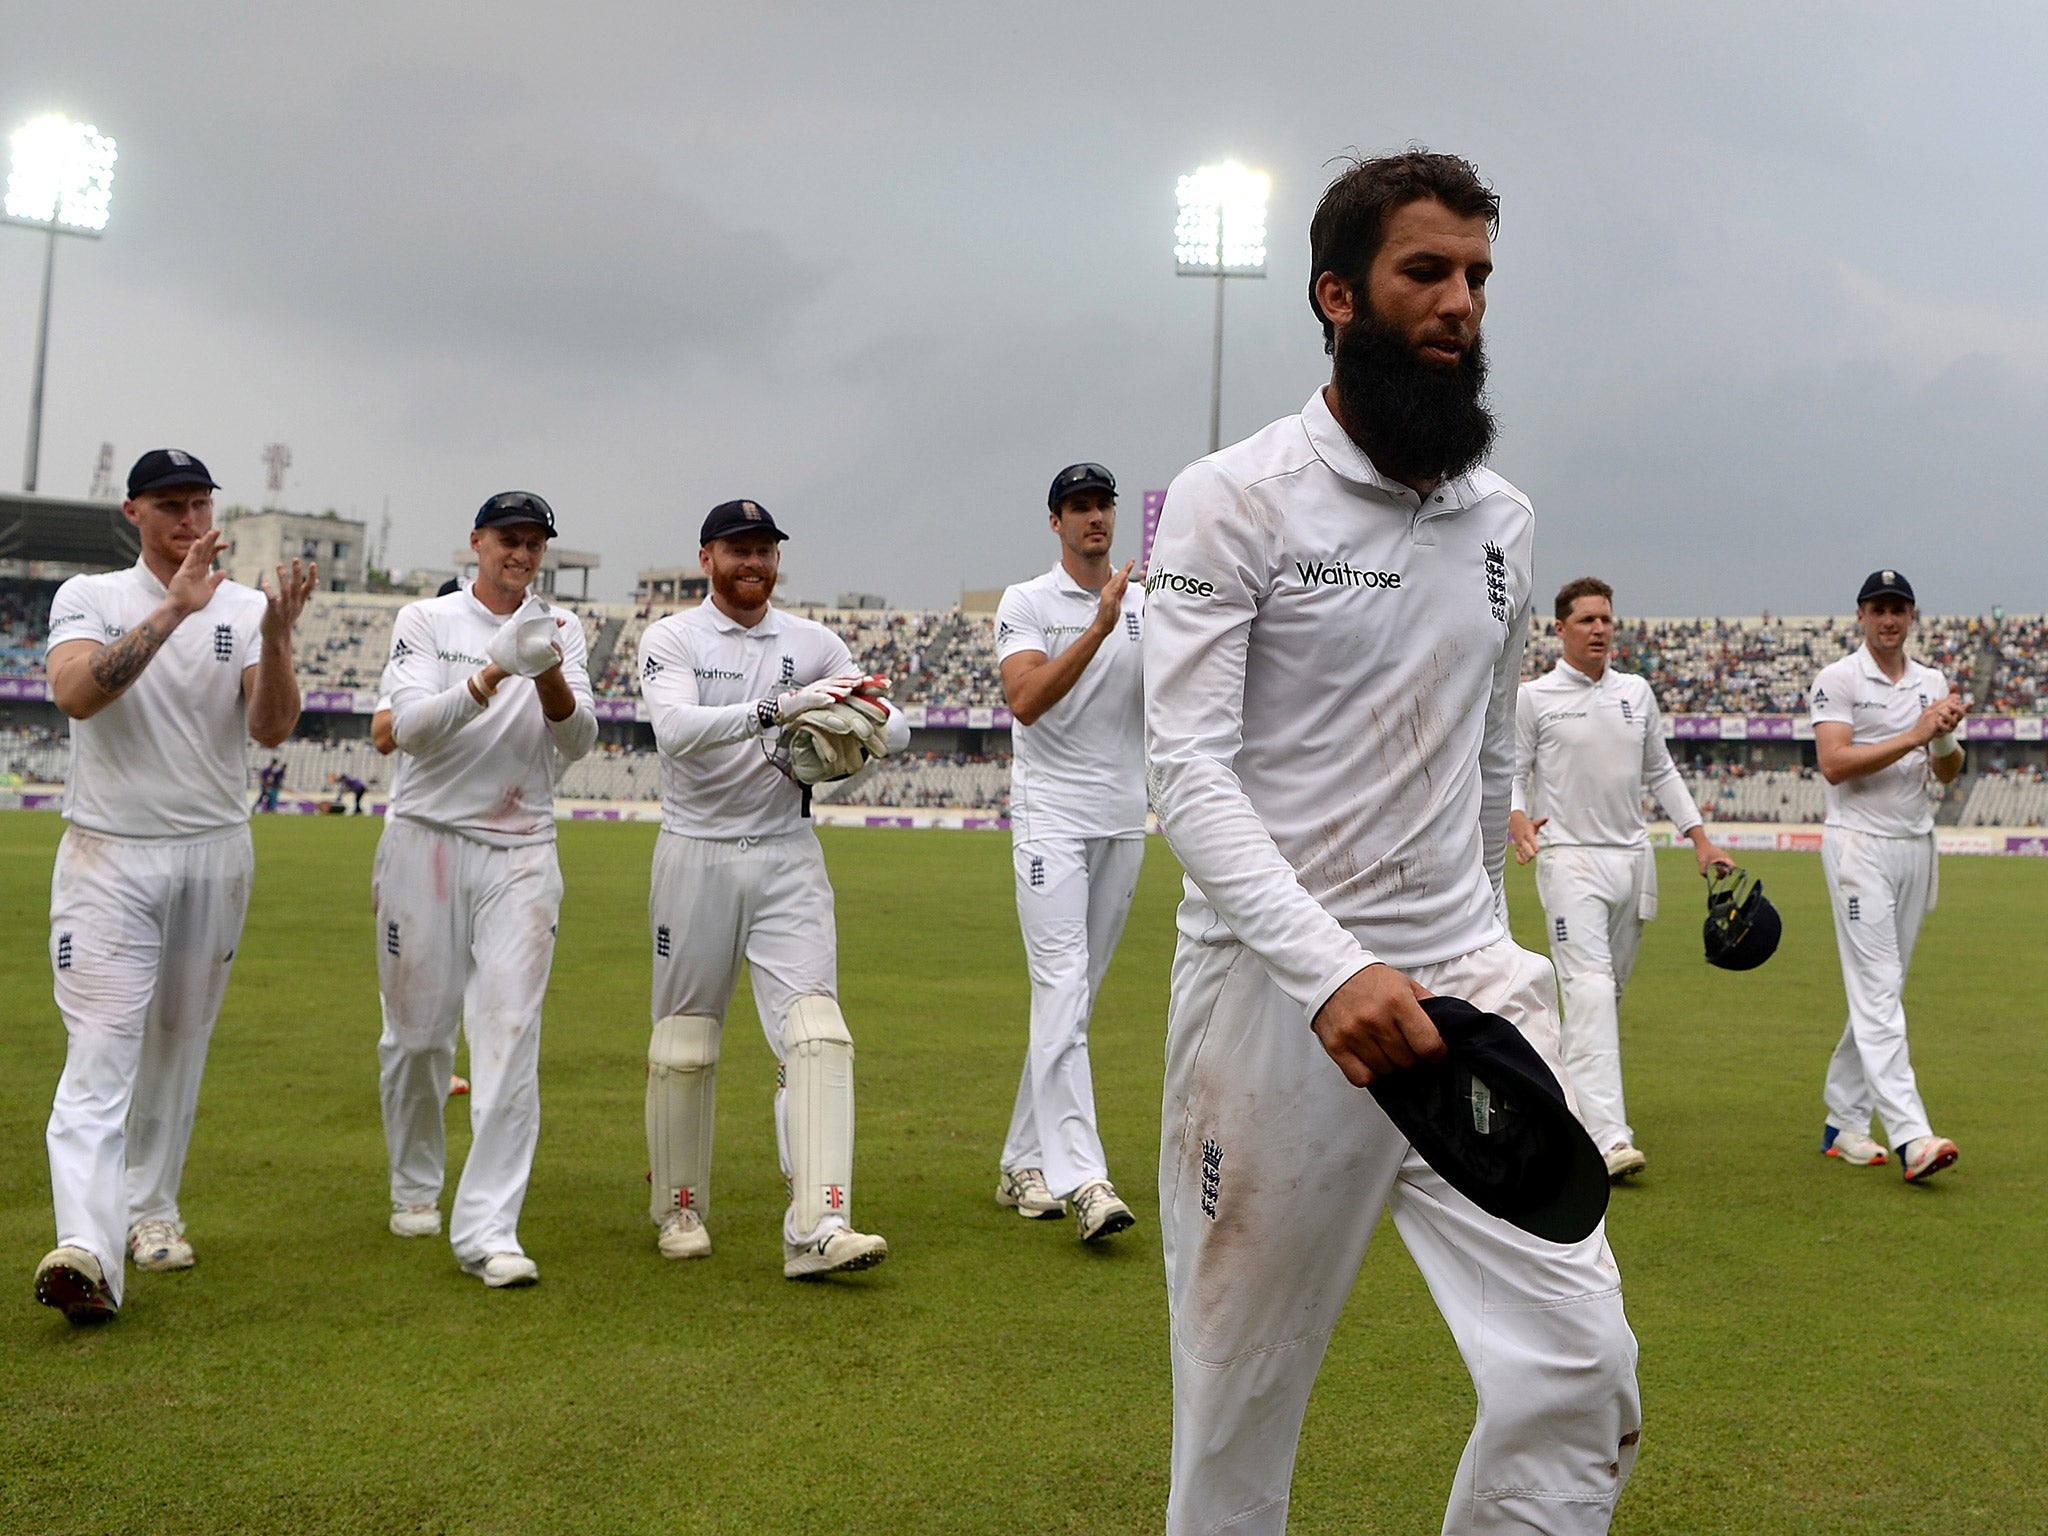 Moeen Ali takes the plaudits from his England teammates as they leave the field